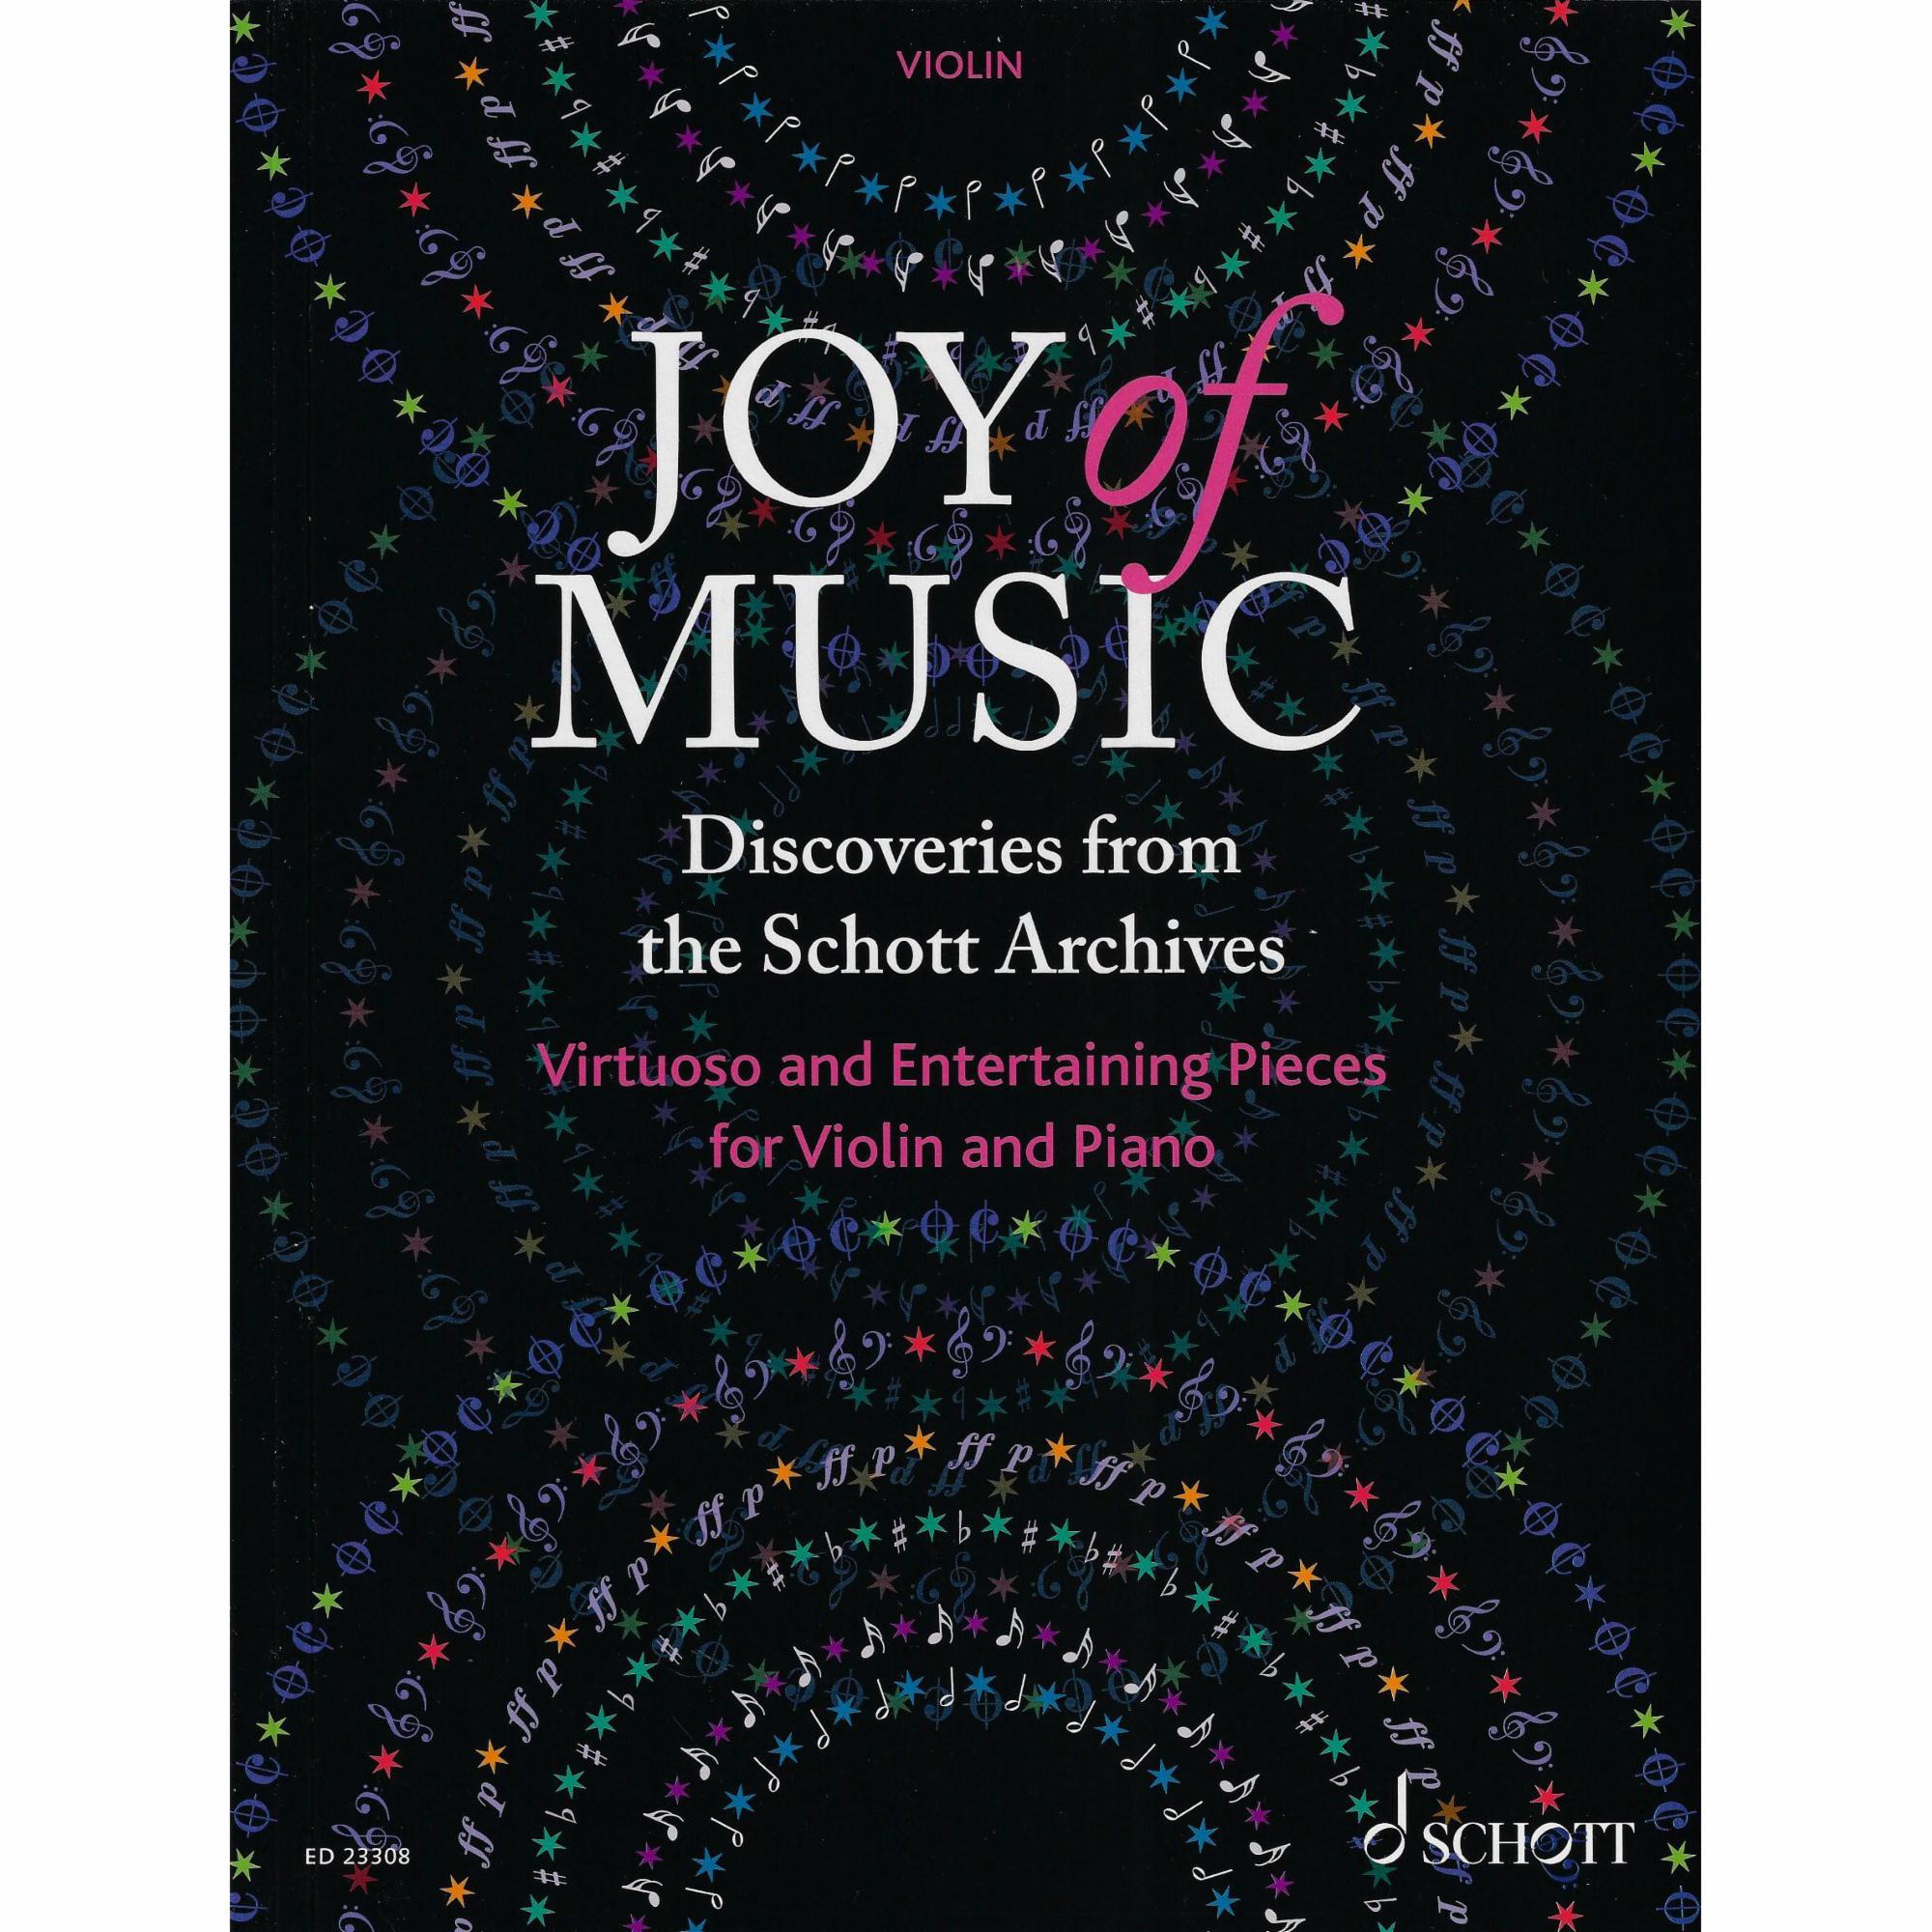 Joy of Music: Virtuoso and Entertaining Pieces for Violin and Piano